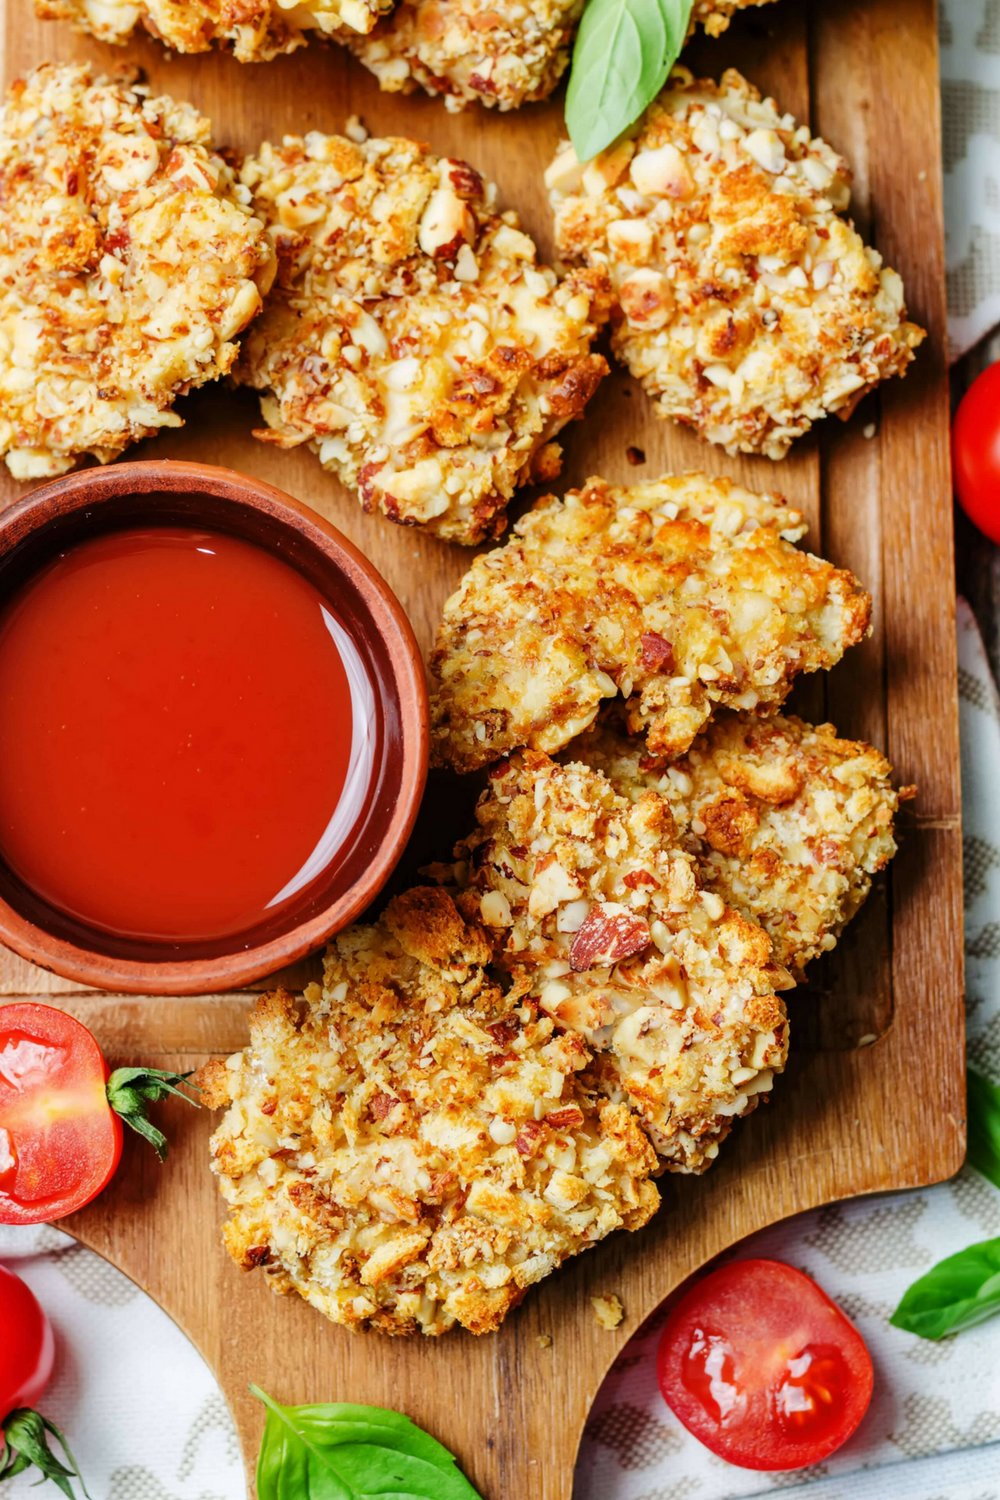 Low carb almond crusted chicken tenders on a wood cutting board with tomatoes and ketchup.